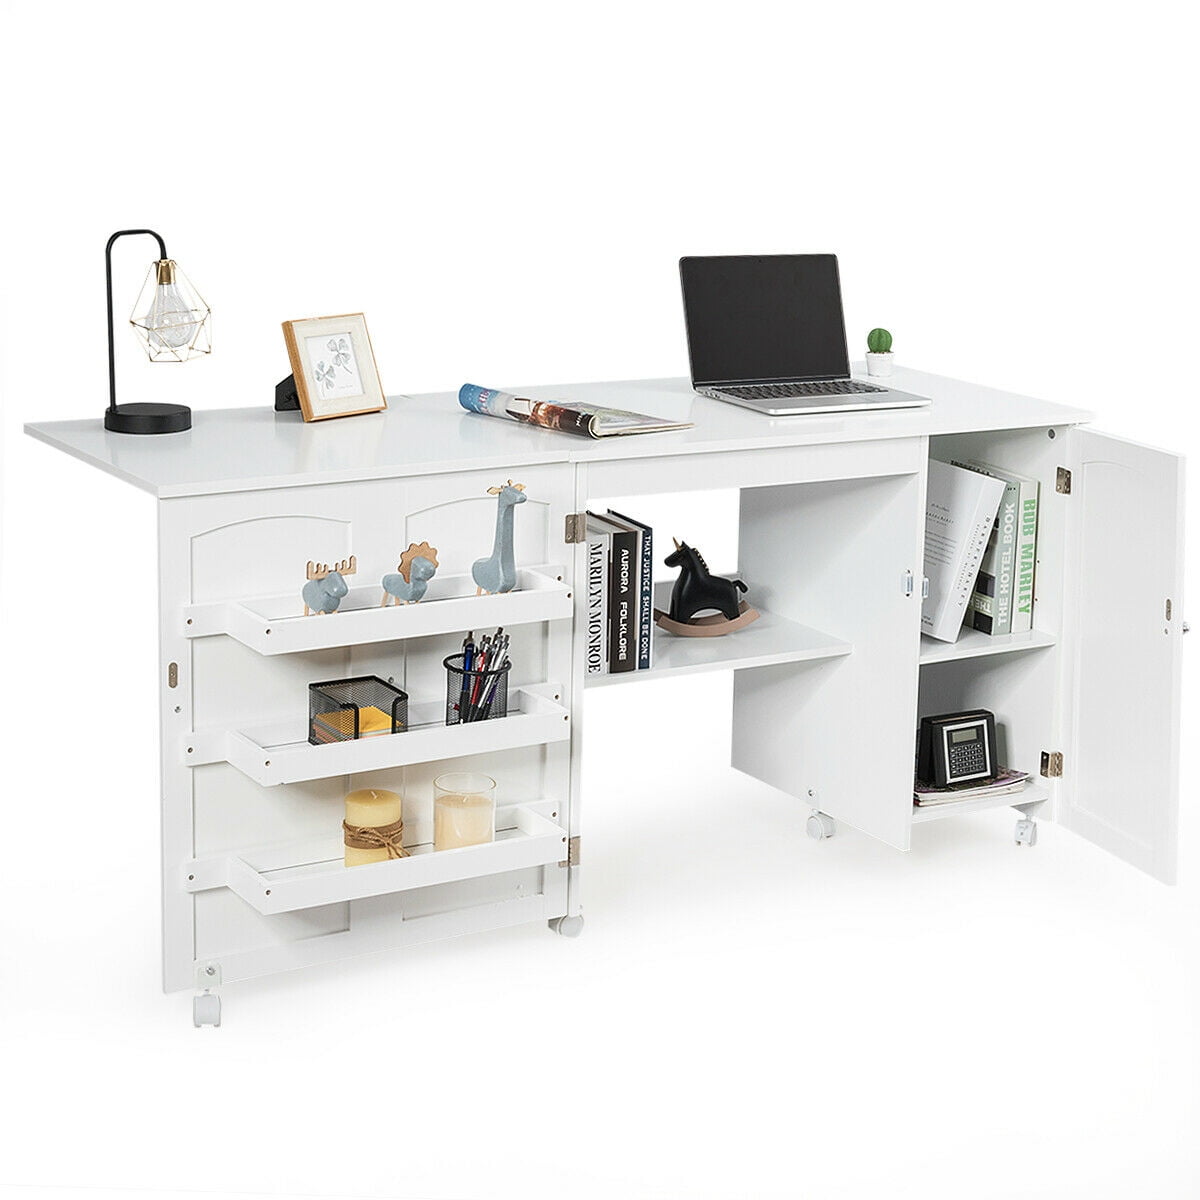 Dropship Folding Sewing Craft Cart&Sewing Cabinet Miscellaneous Sewing Kit  Art Desk With Storage Shelves And Lockable Casters-White to Sell Online at  a Lower Price